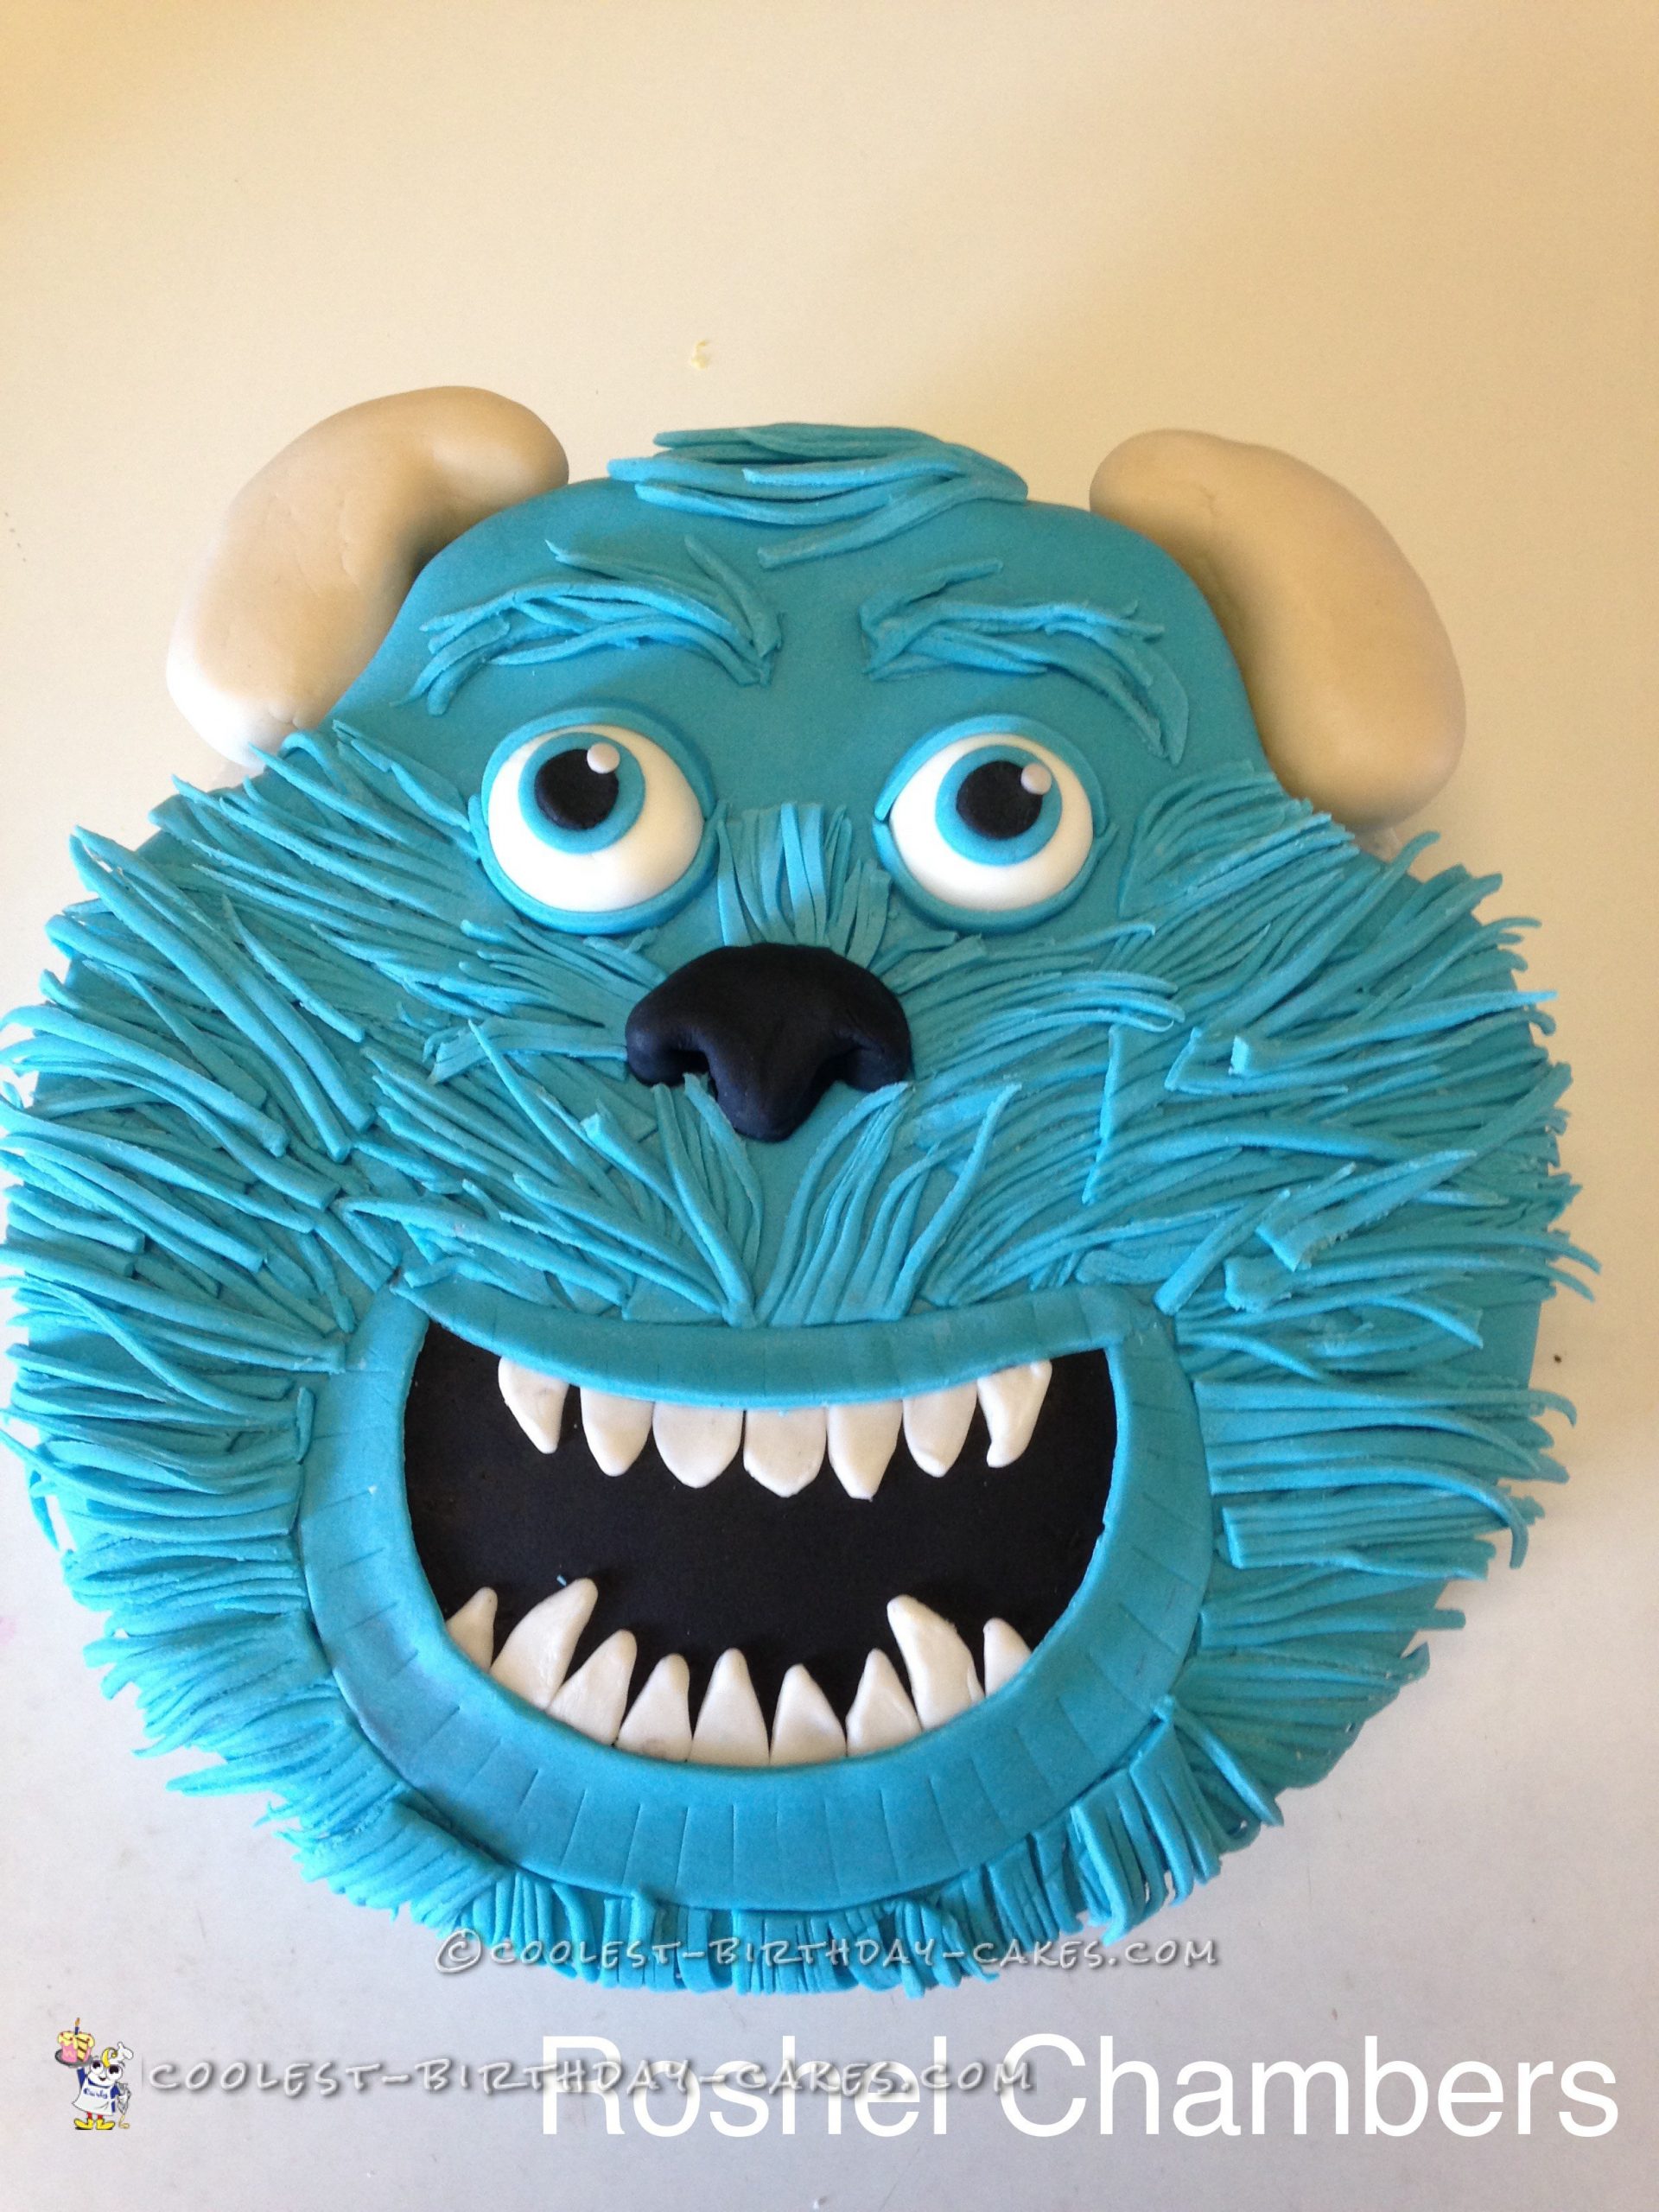 Call Me Sulley Monsters Inc. Birthday Cake